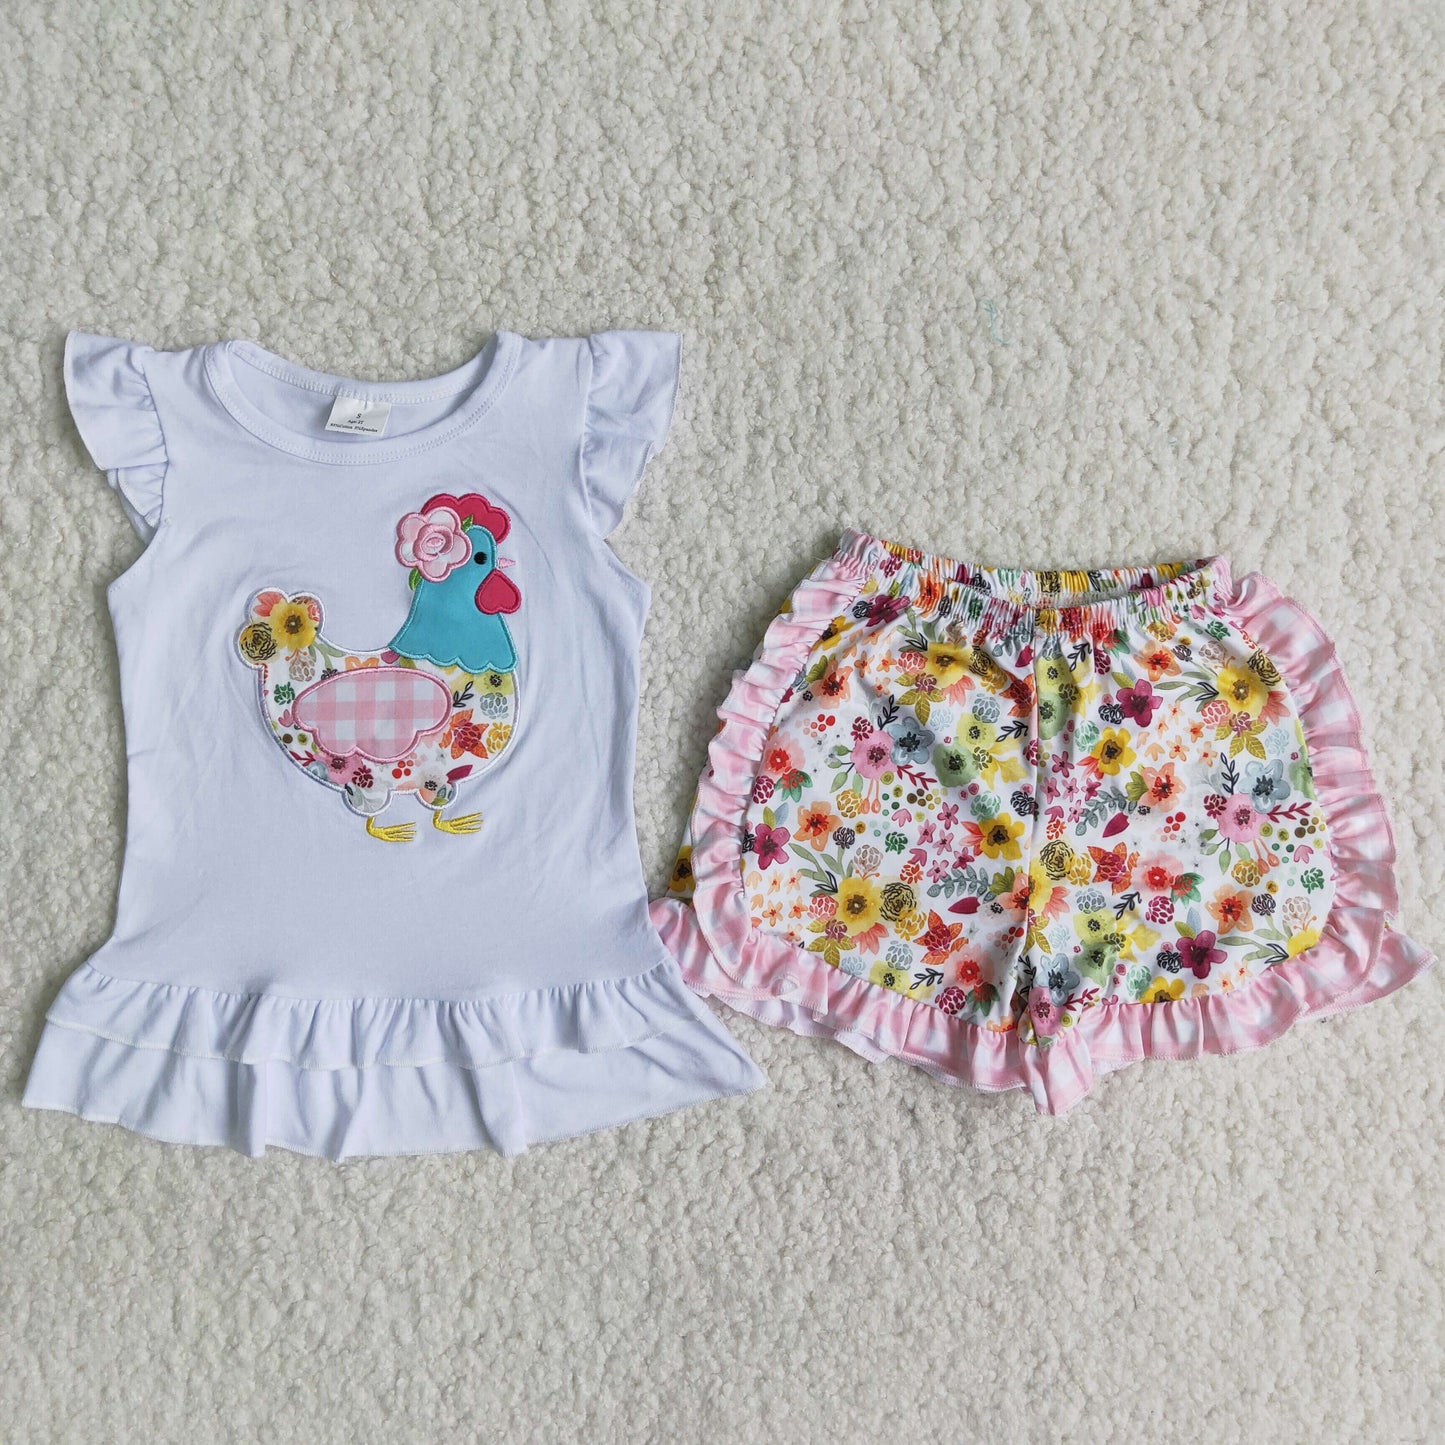 Chicken embroidery kids summer clothing